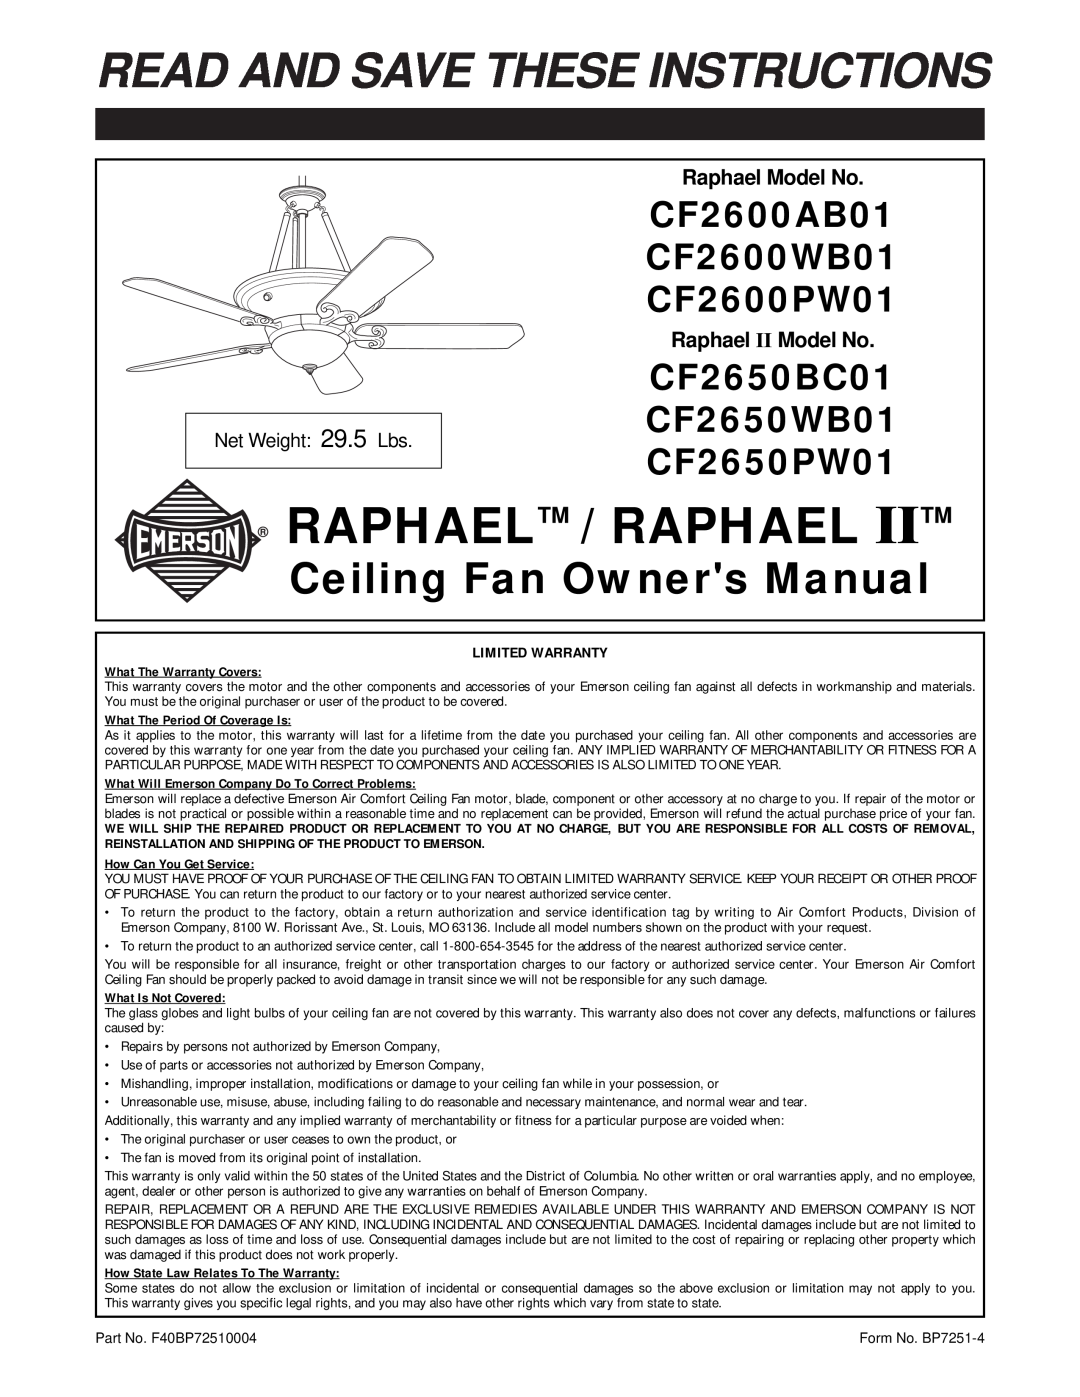 Emerson BP7251 warranty Raphael / Raphael, Read And Save These Instructions, CF2600AB01 CF2600WB01 CF2600PW01 